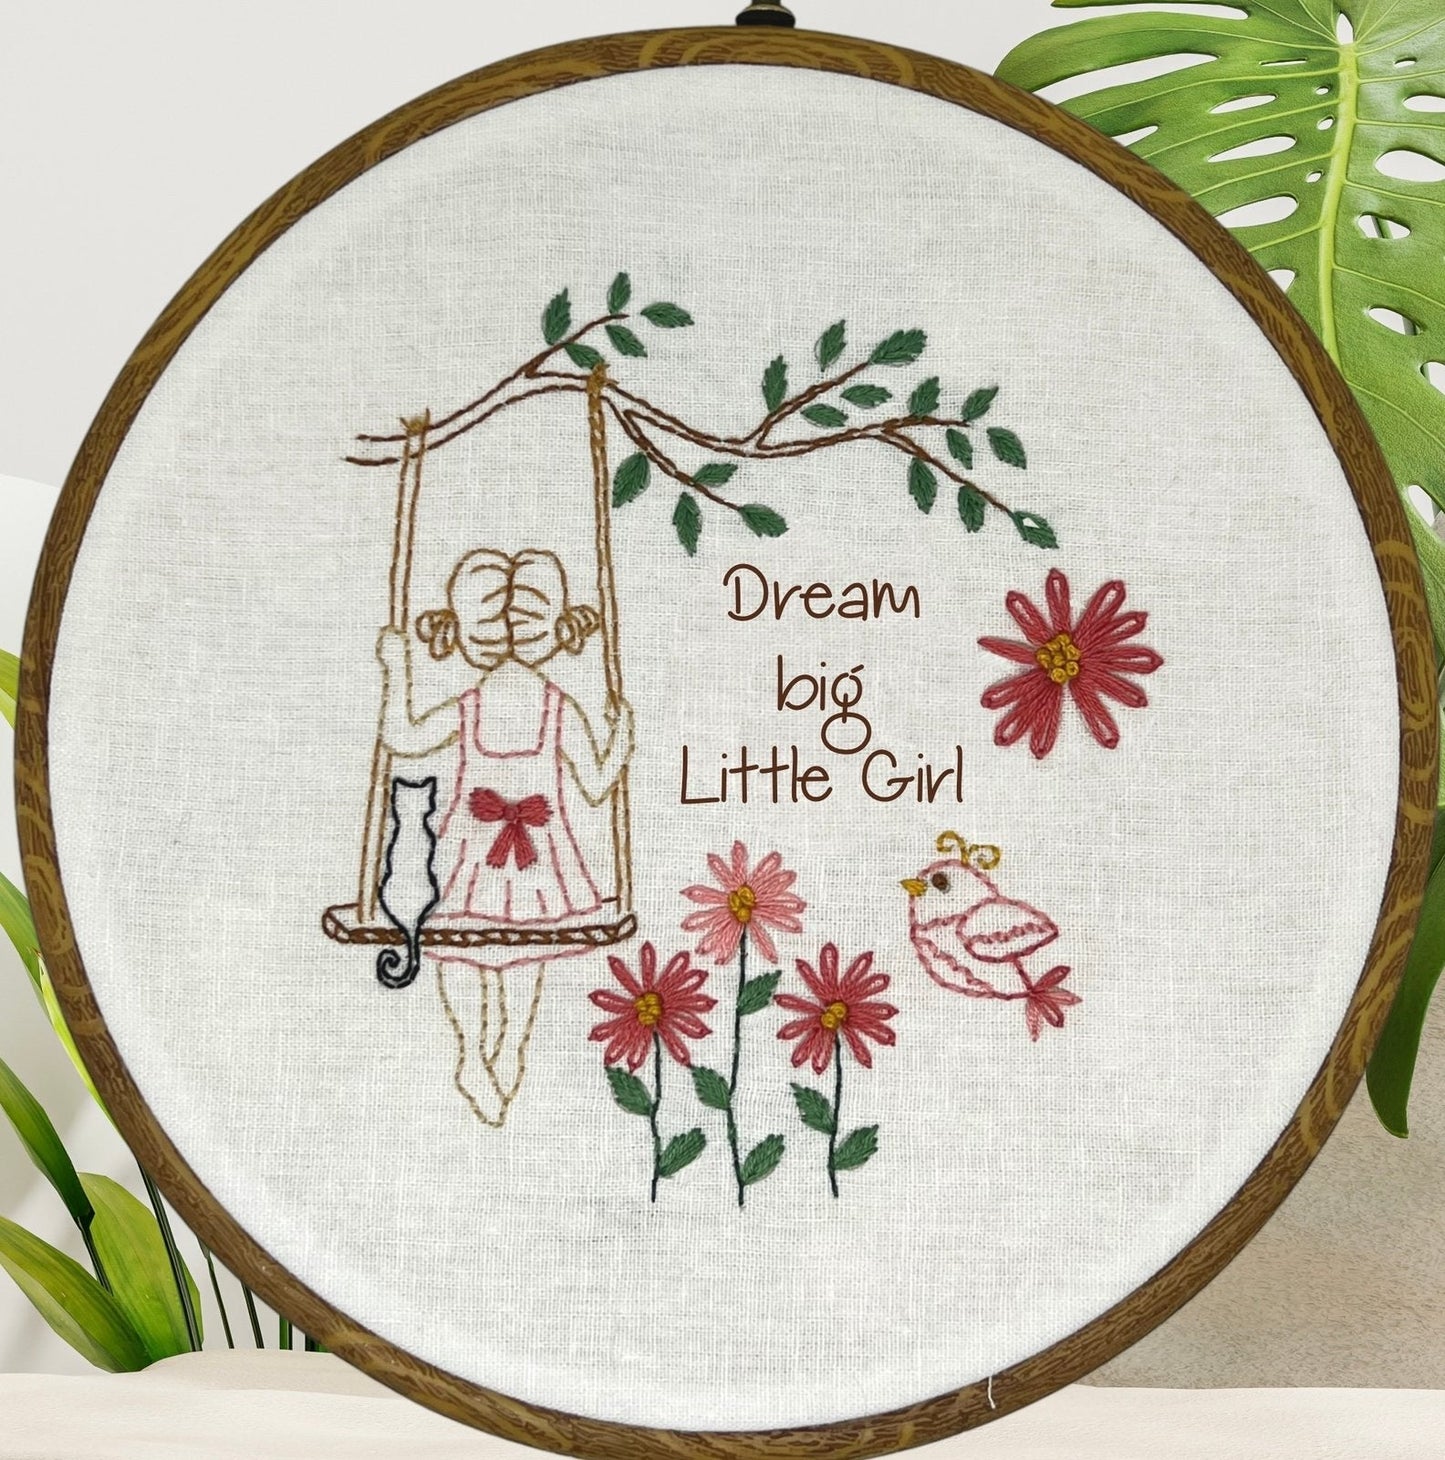 6" Child of God , Dream Big  Embroidery Kit